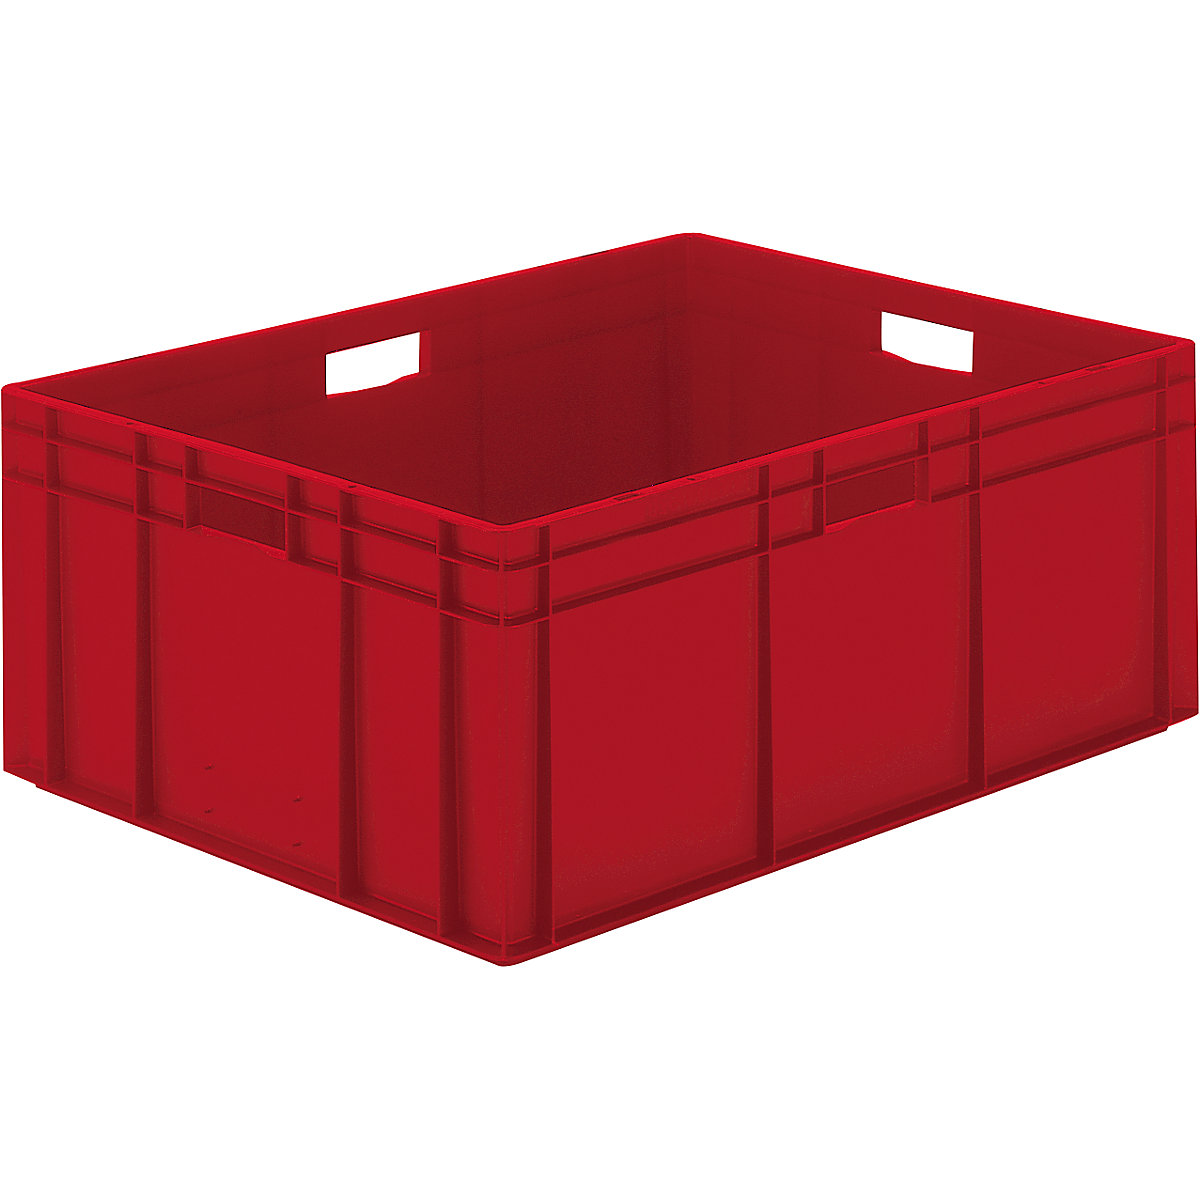 Euro stacking container, closed walls and base, LxWxH 800 x 600 x 320 mm, red, pack of 2-7